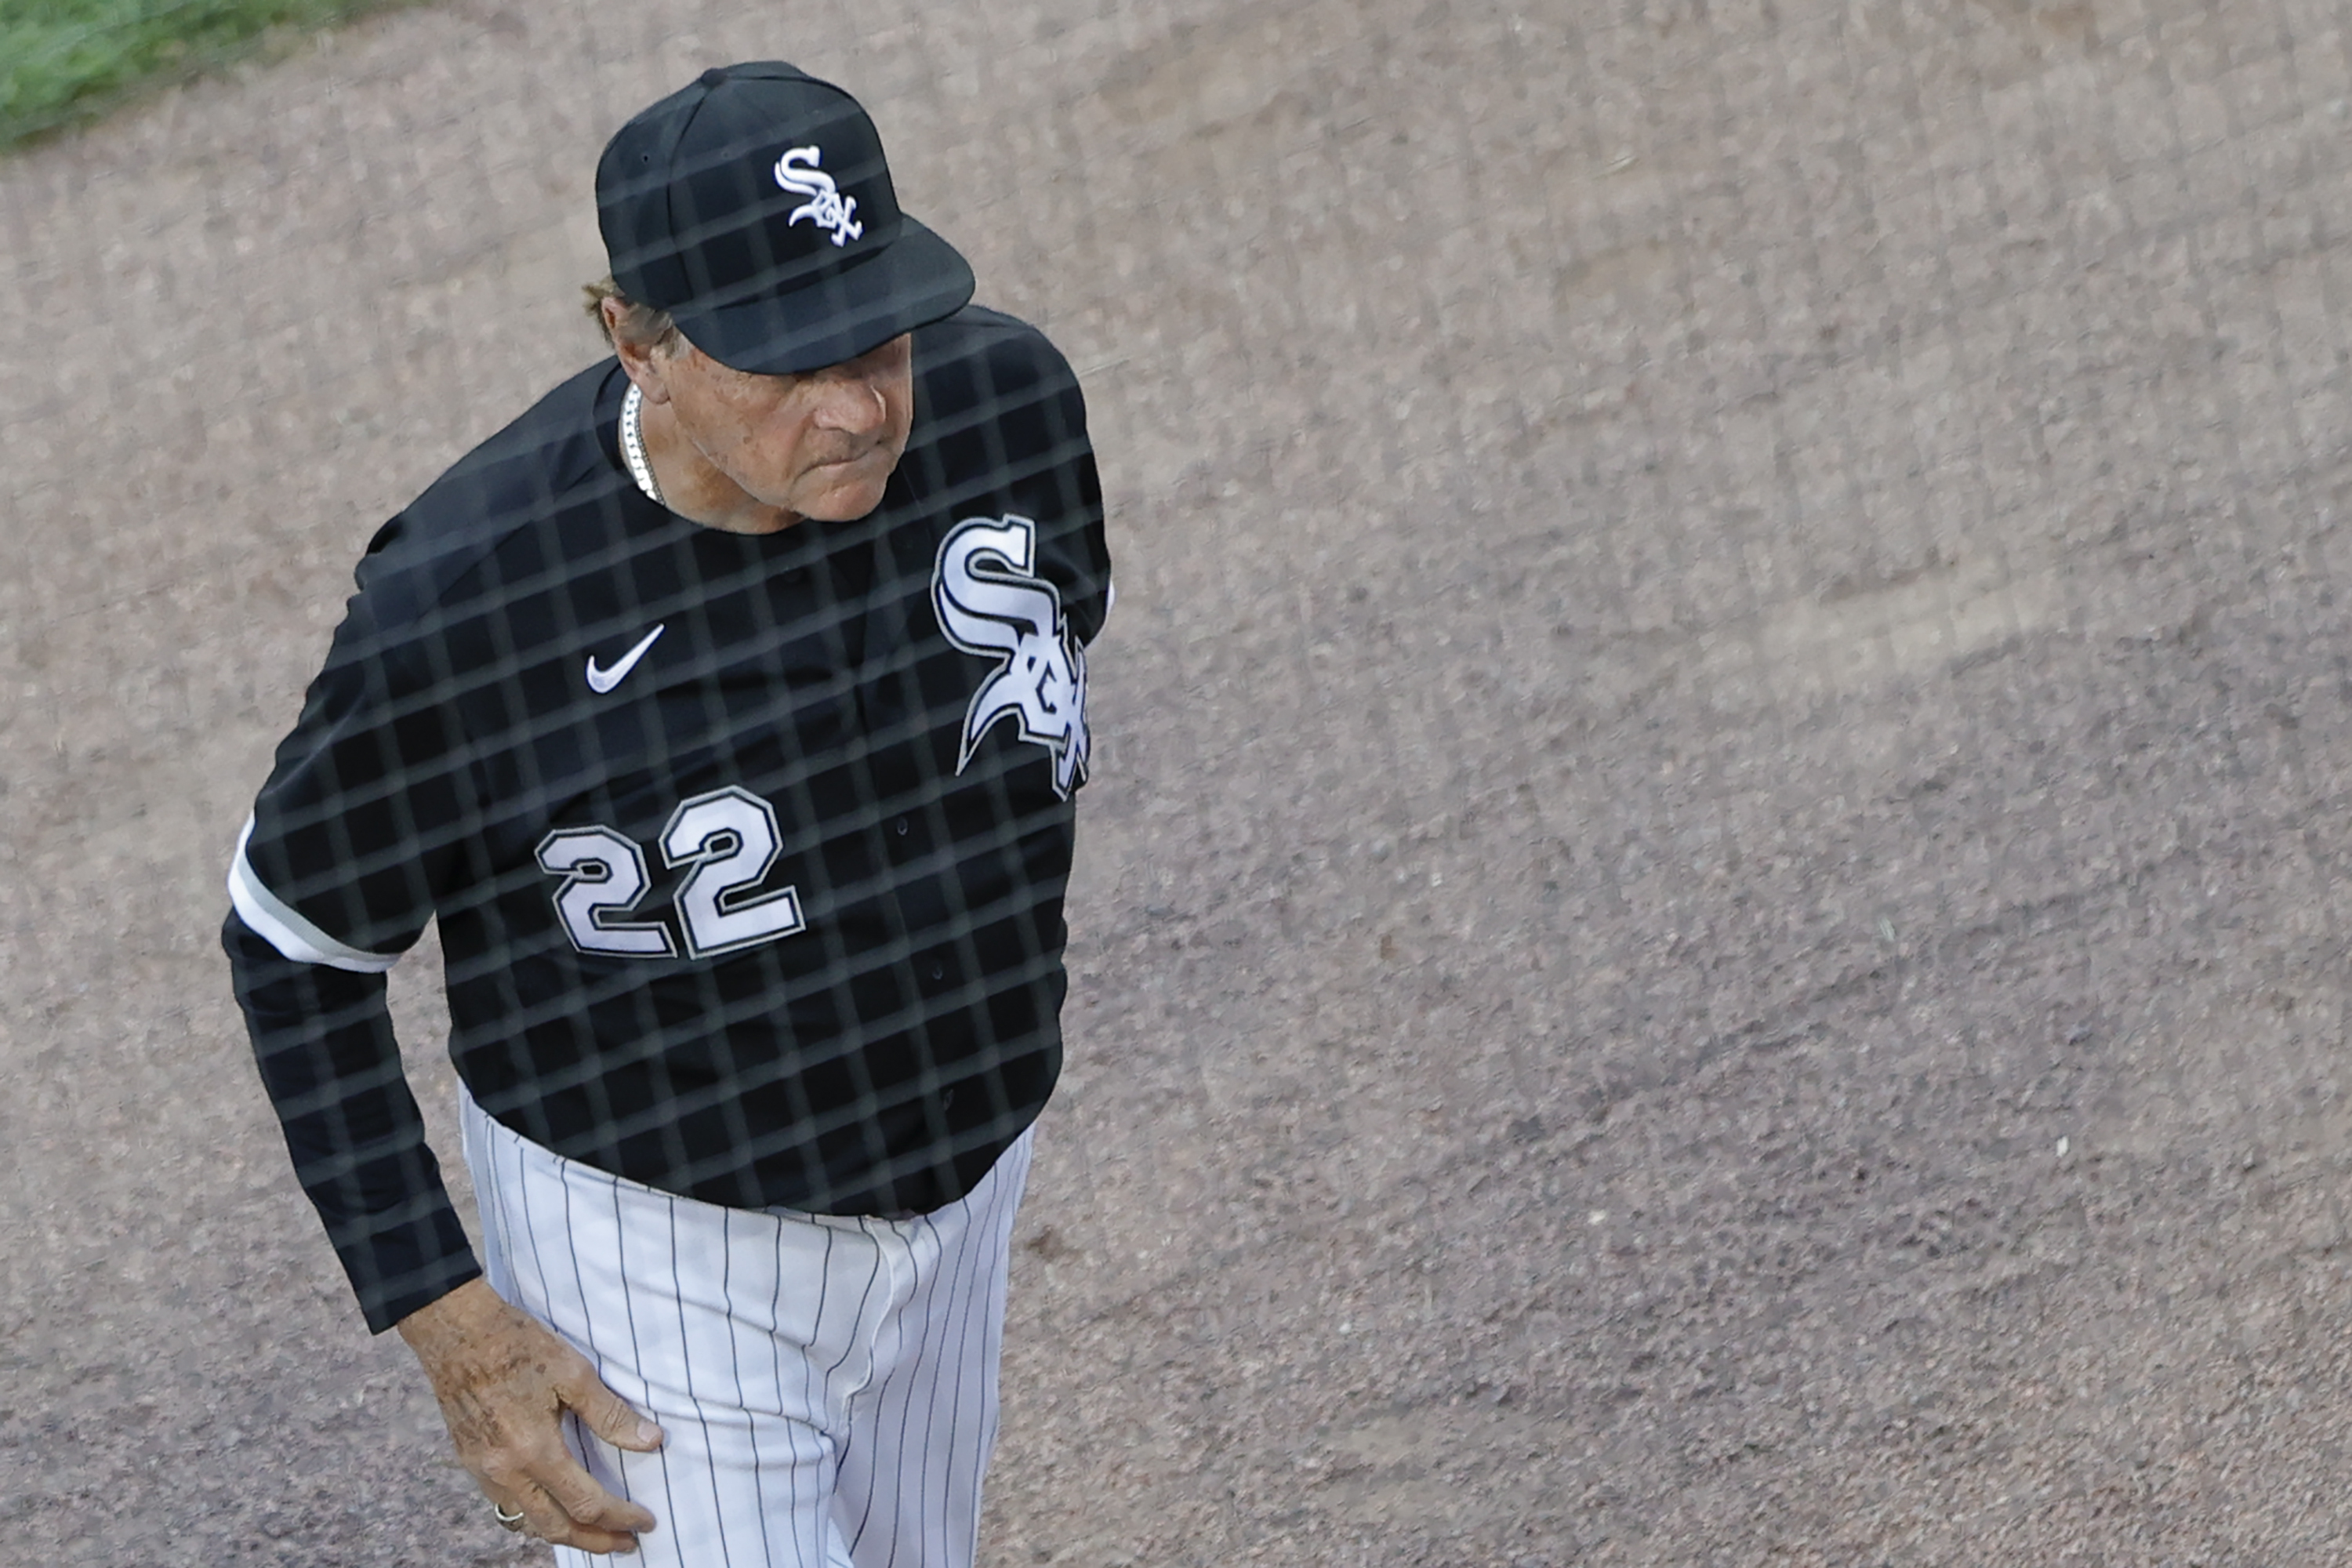 Chicago White Sox: Yermin Mercedes is apparently not retiring